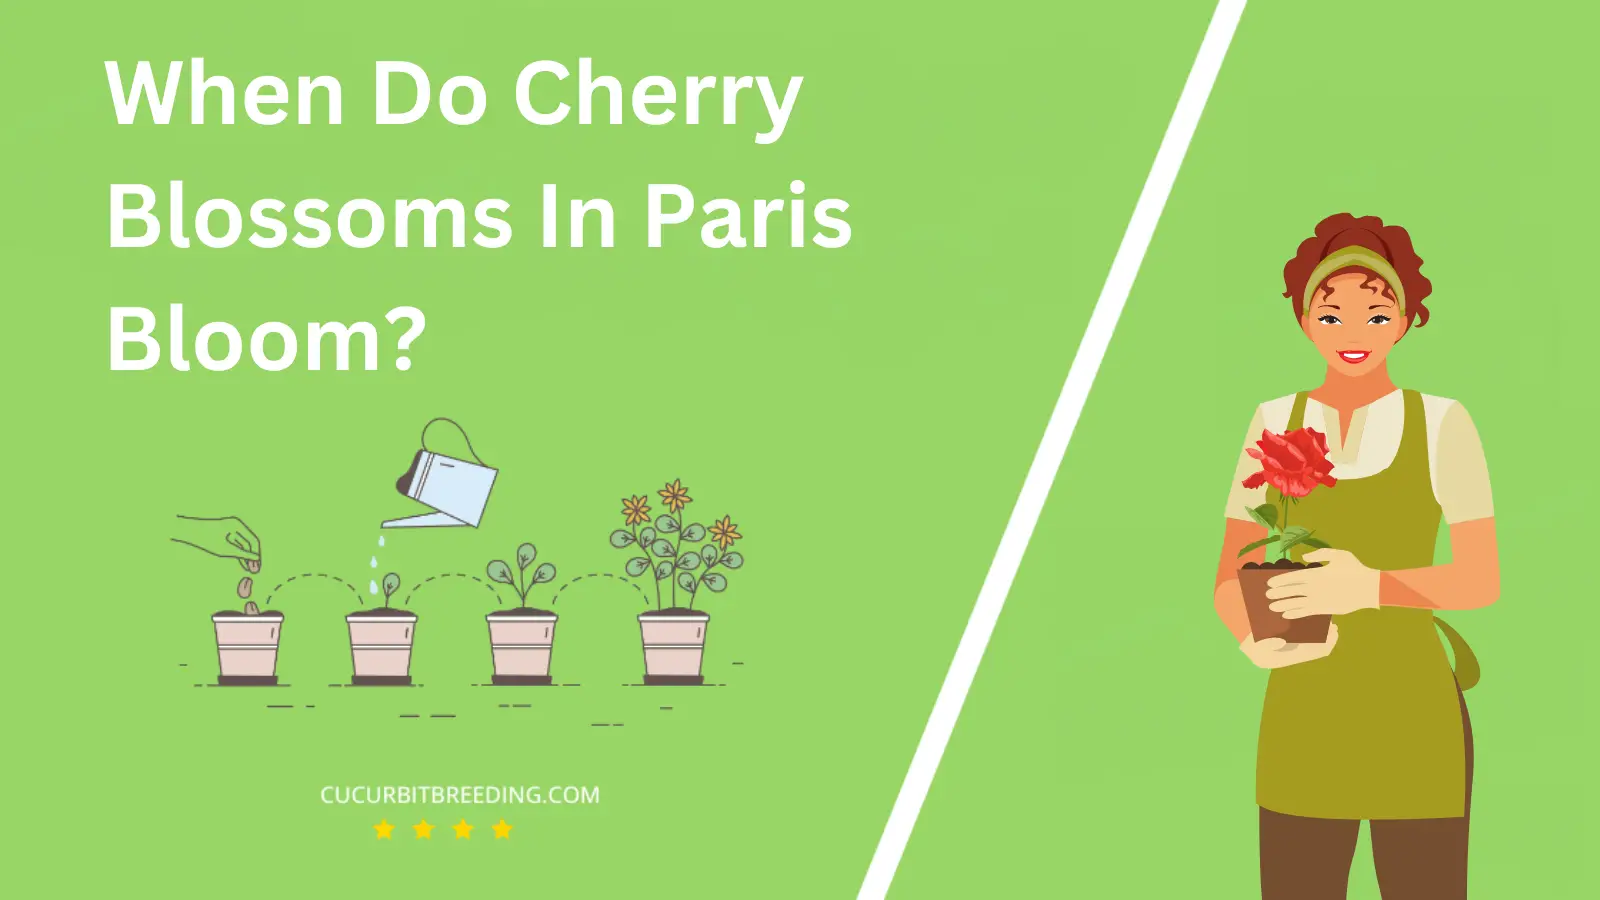 When Do Cherry Blossoms In Paris Bloom?